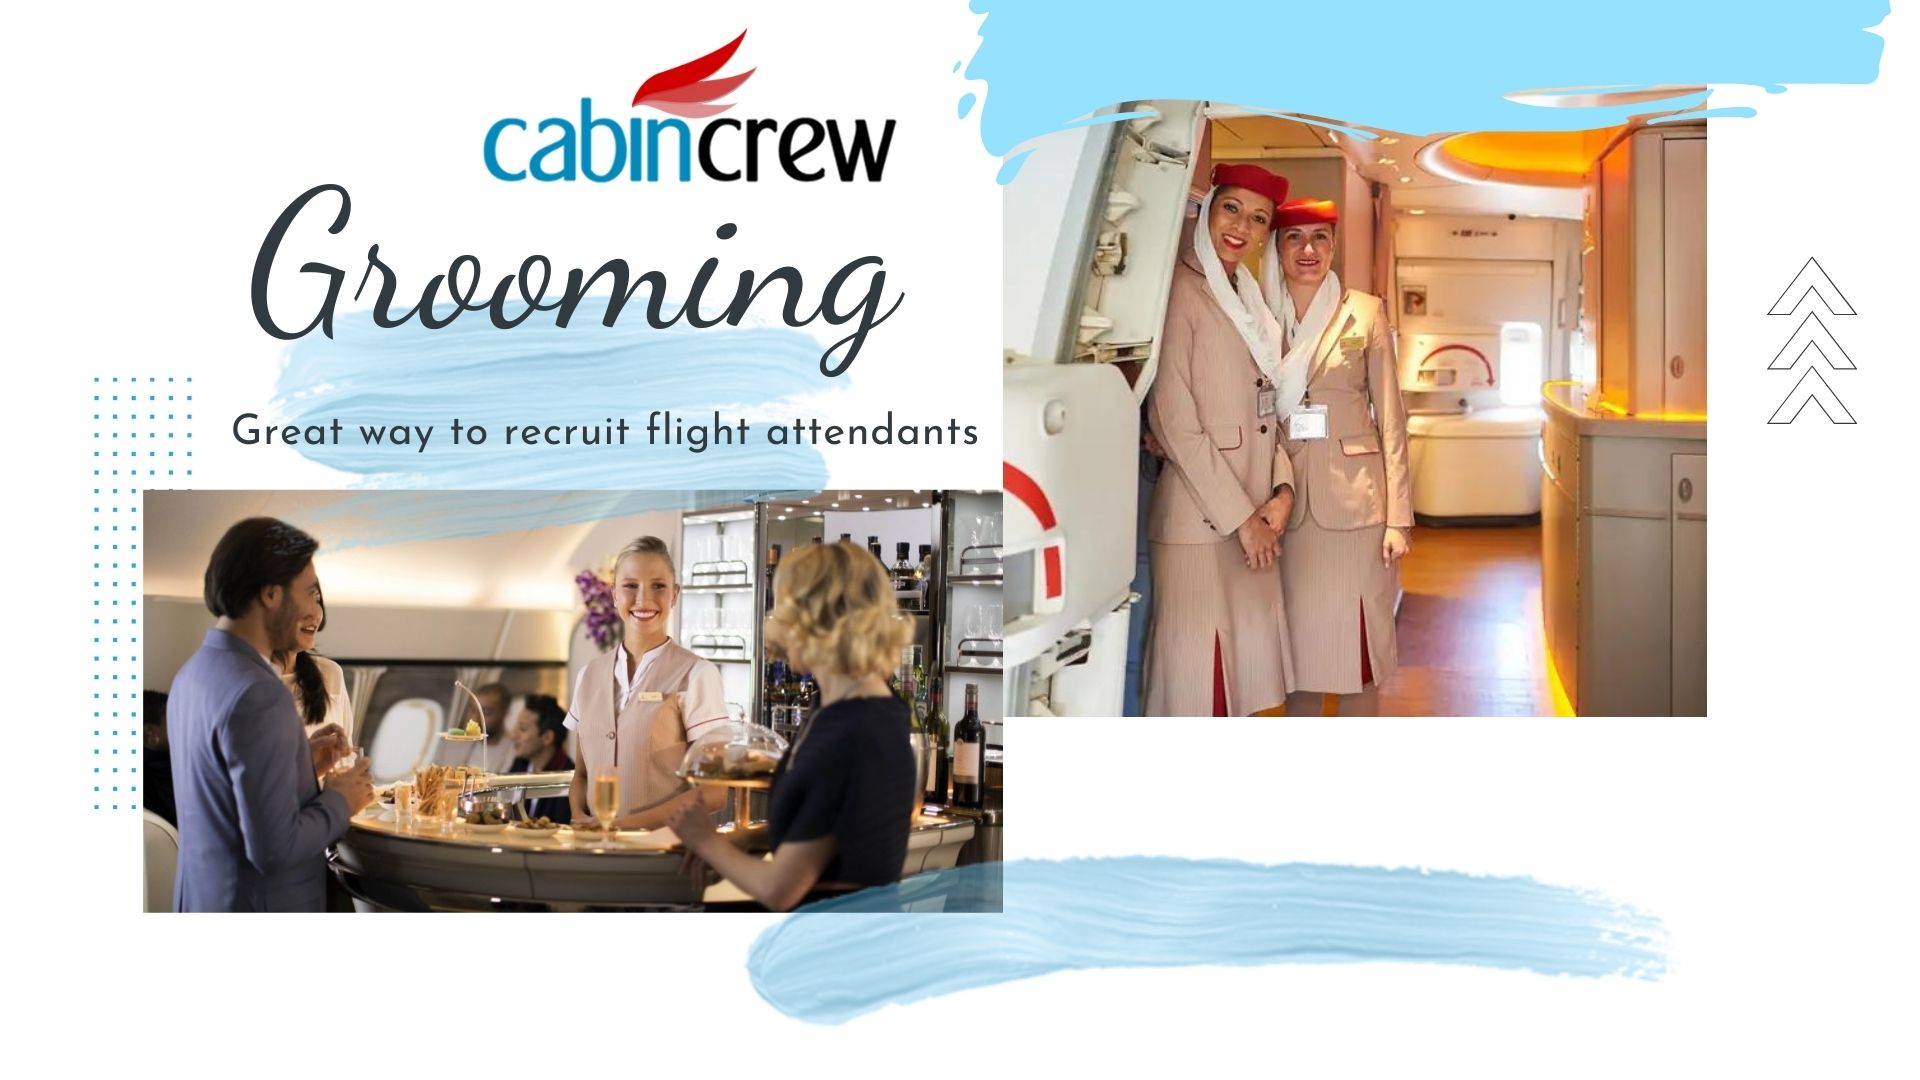 Grooming secrets when interviewing Emirates Airlines cabin crew - Cabin Crew  WIKI